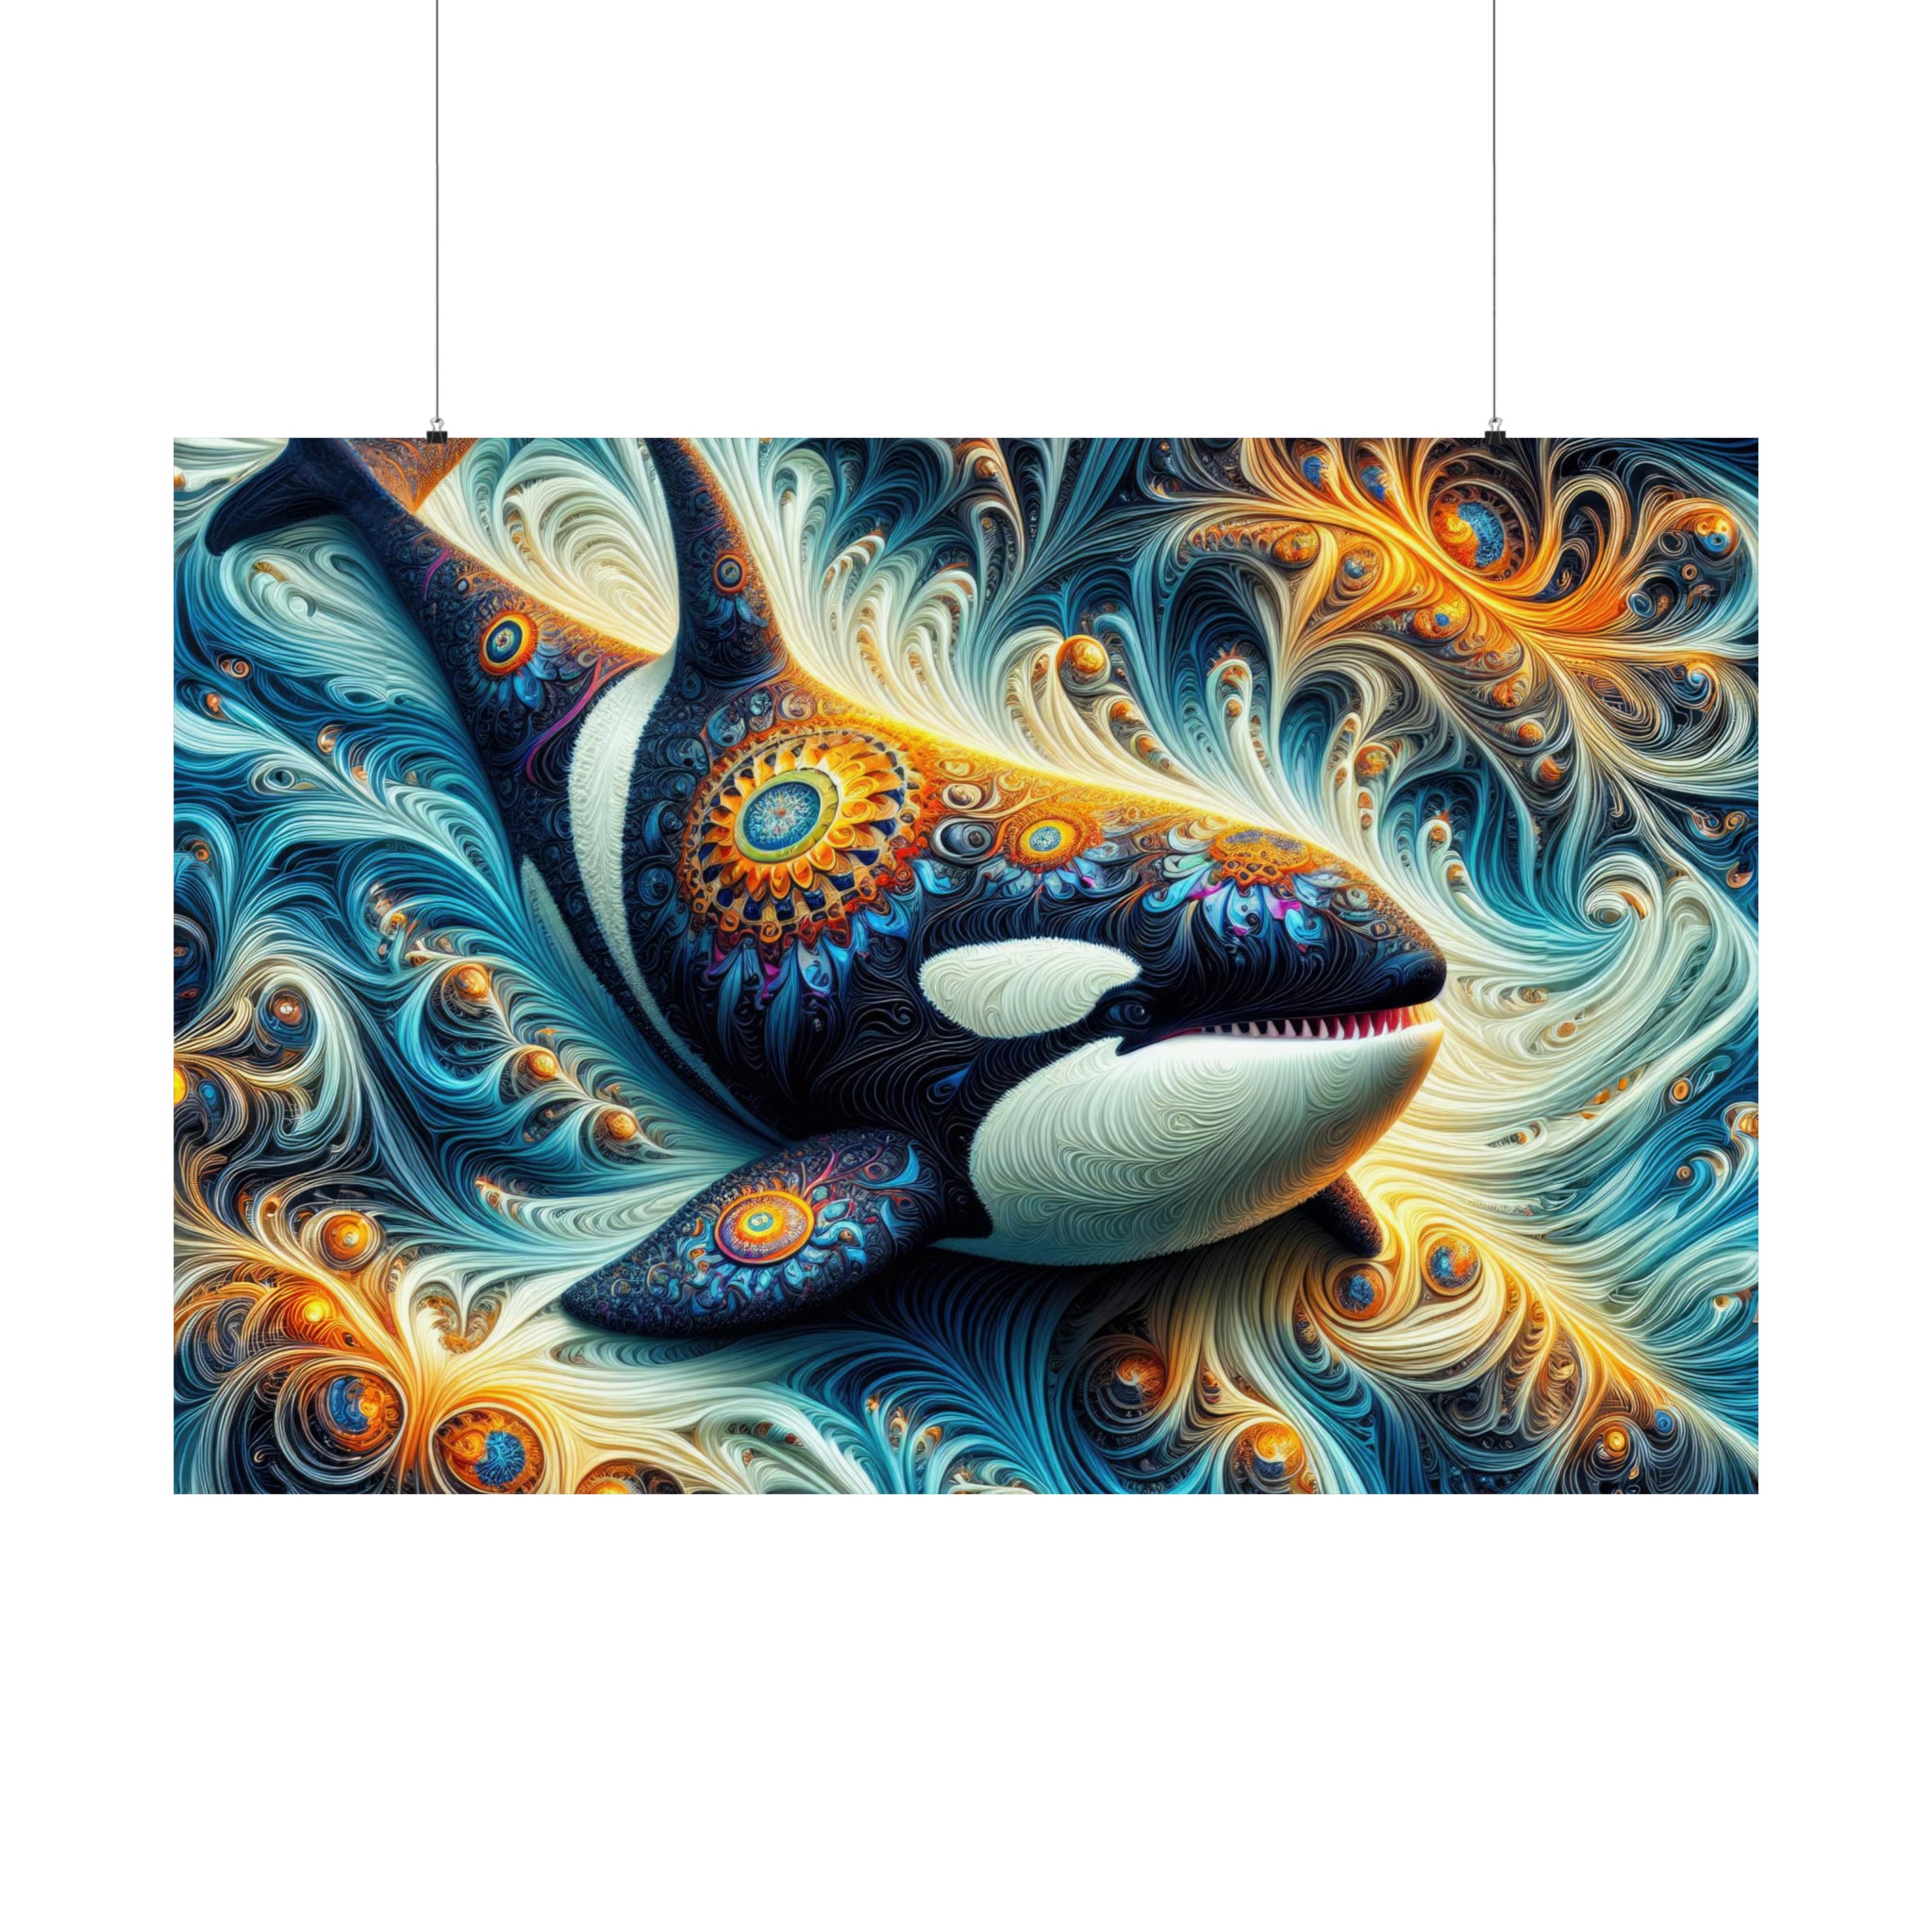 The Mandala Orca of the Abyssal Whorls Poster